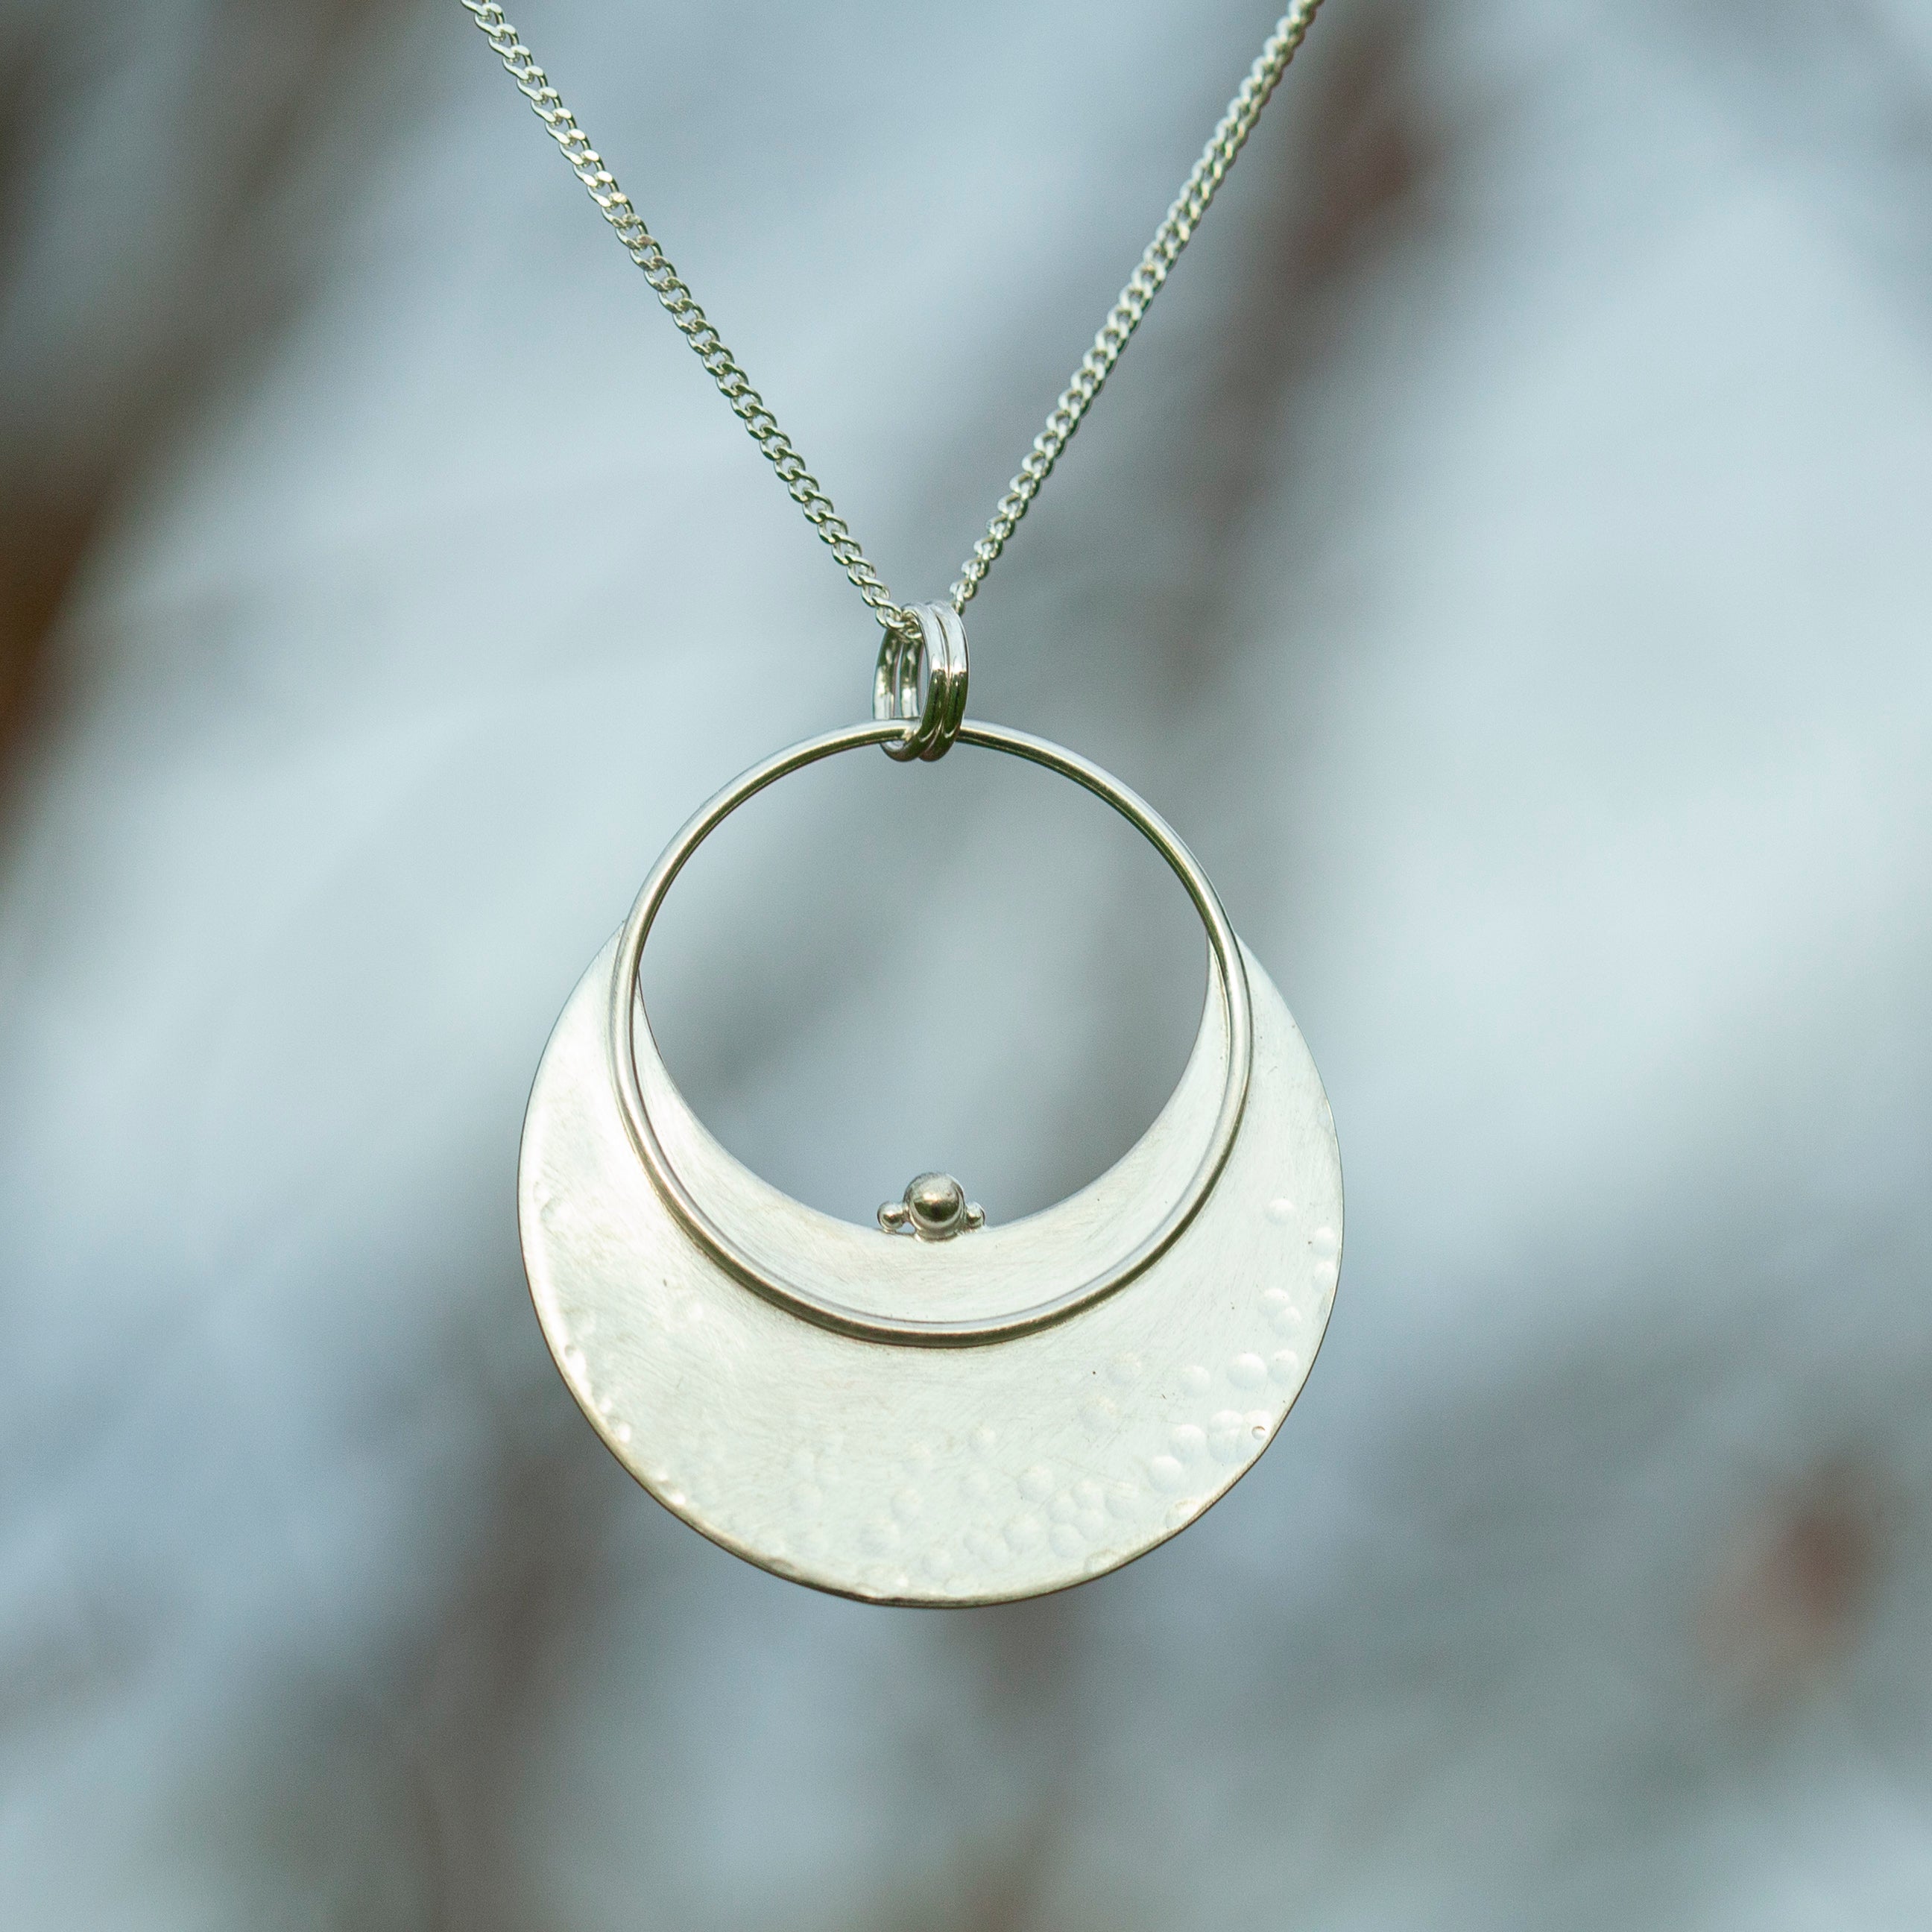 OOAK • Crescent moon pendant in silver #8 (ready to ship)